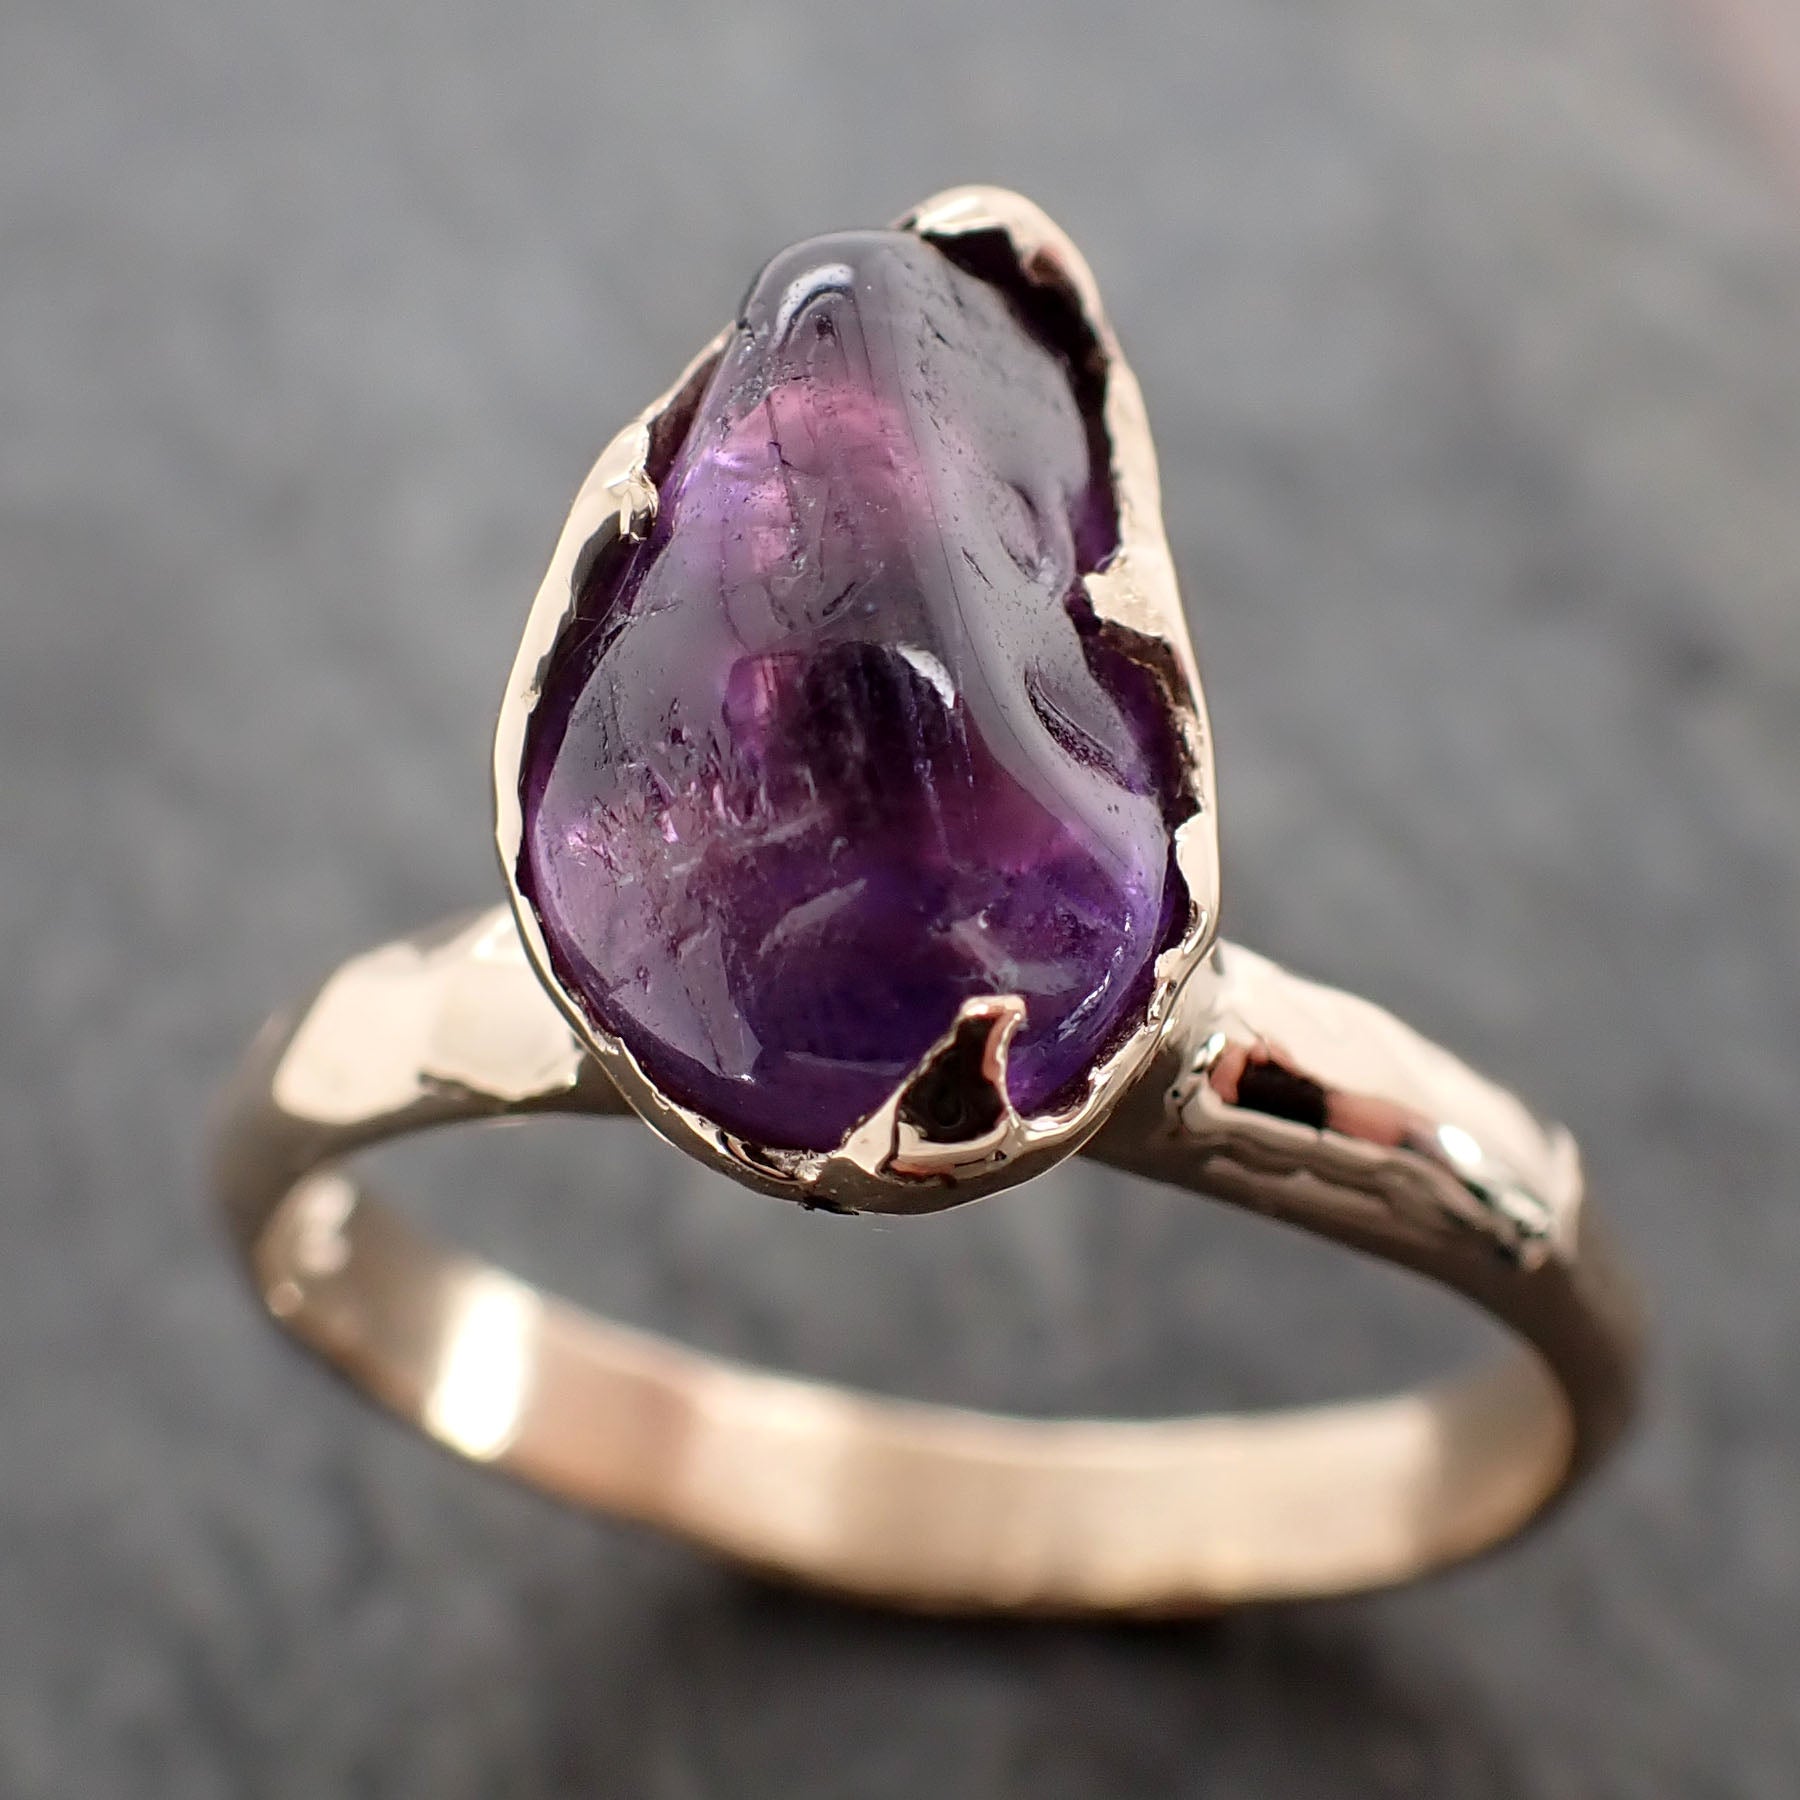 Sapphire tumbled 14k yellow gold Solitaire purple polished gemstone ring 2843